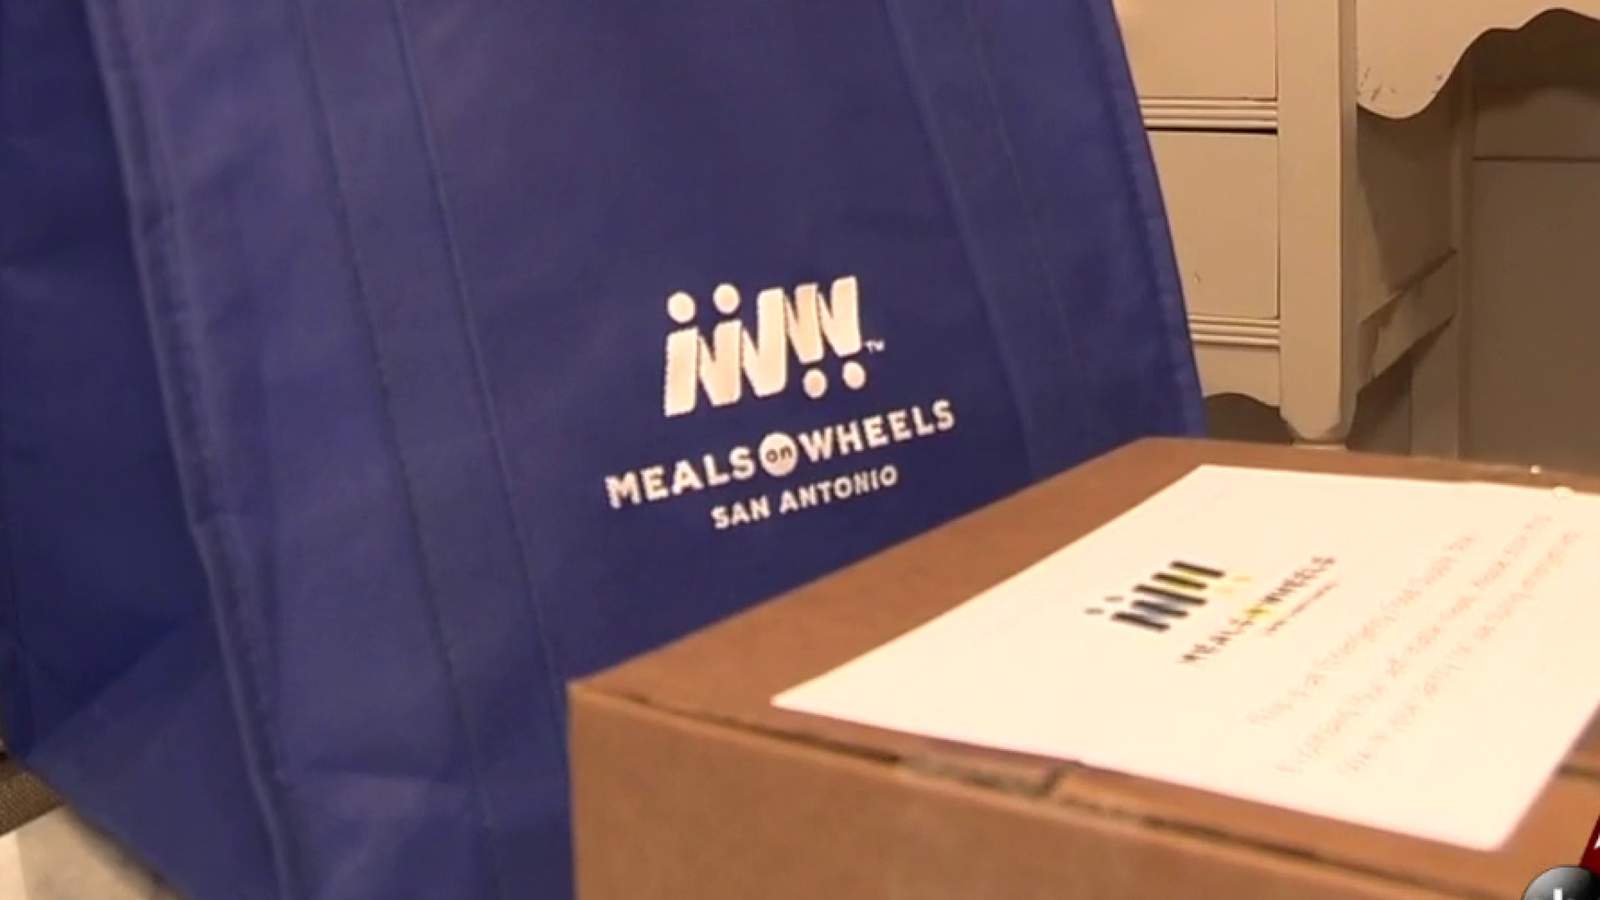 Meals on Wheels, Soldiers Angels partner to feed homebound veterans